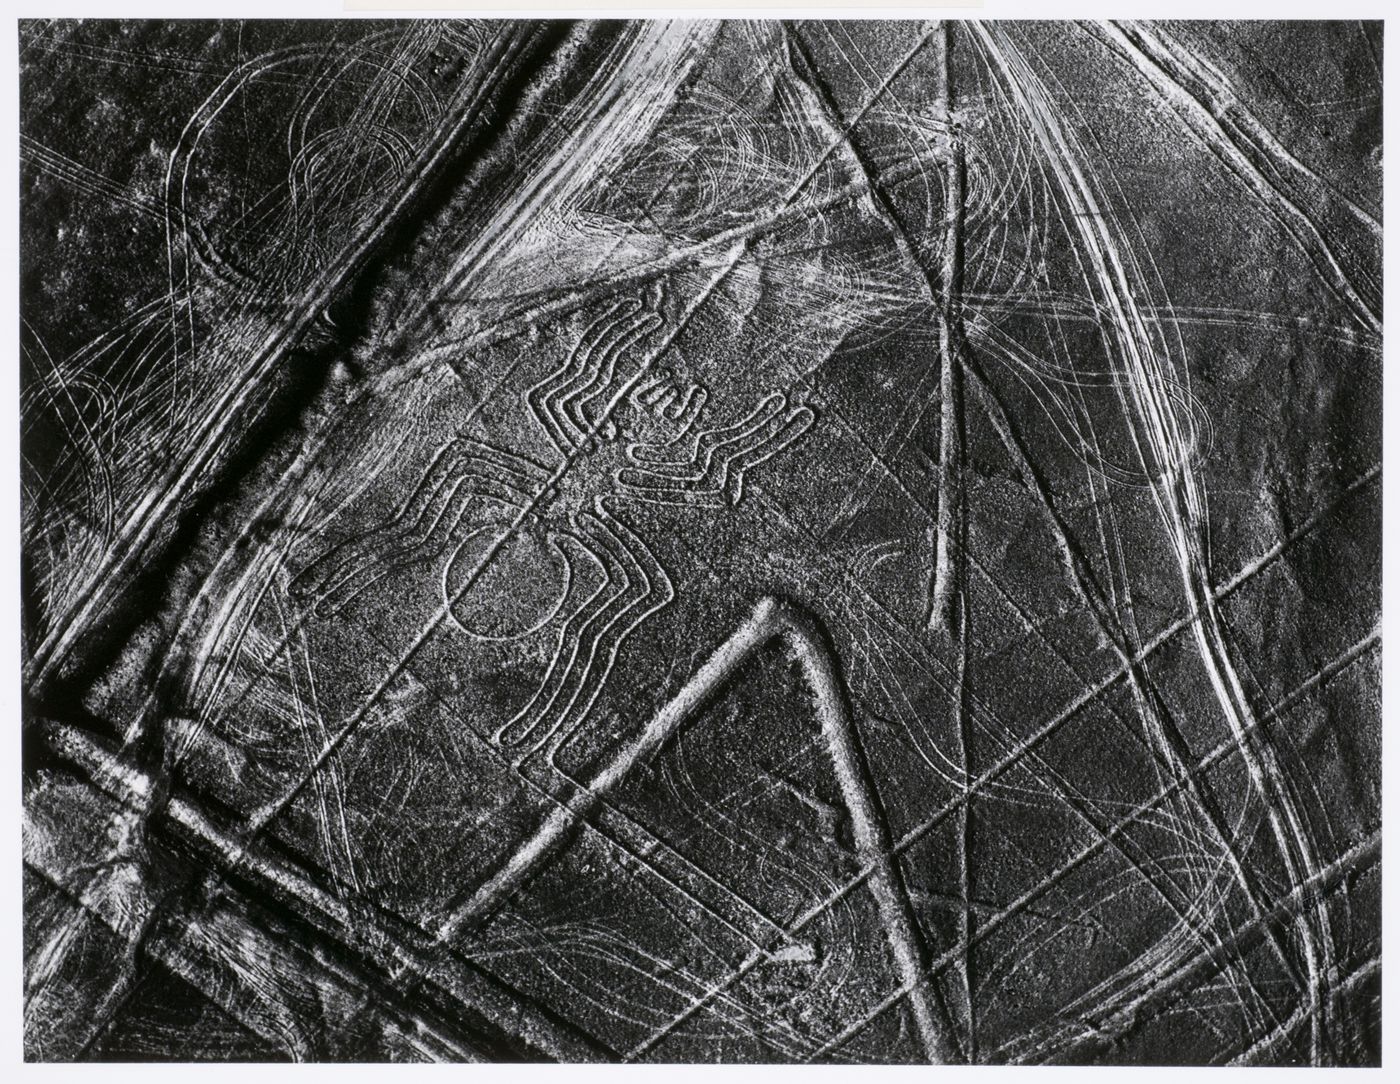 Aerial view of the ancient earthwork "Spider", Nazca, Peru